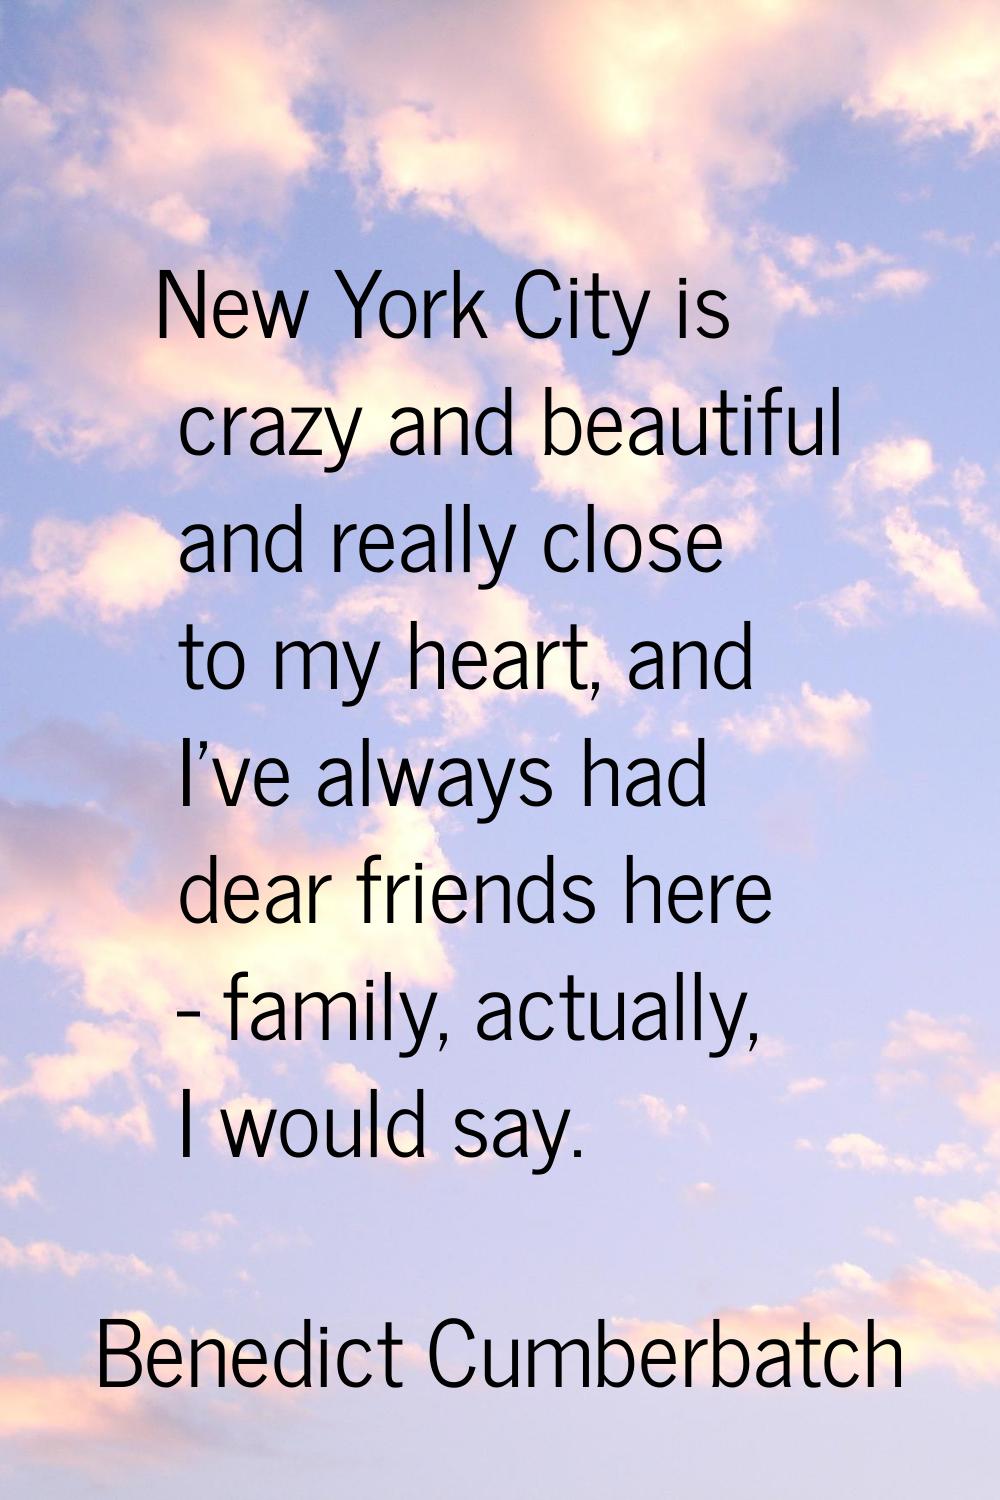 New York City is crazy and beautiful and really close to my heart, and I've always had dear friends